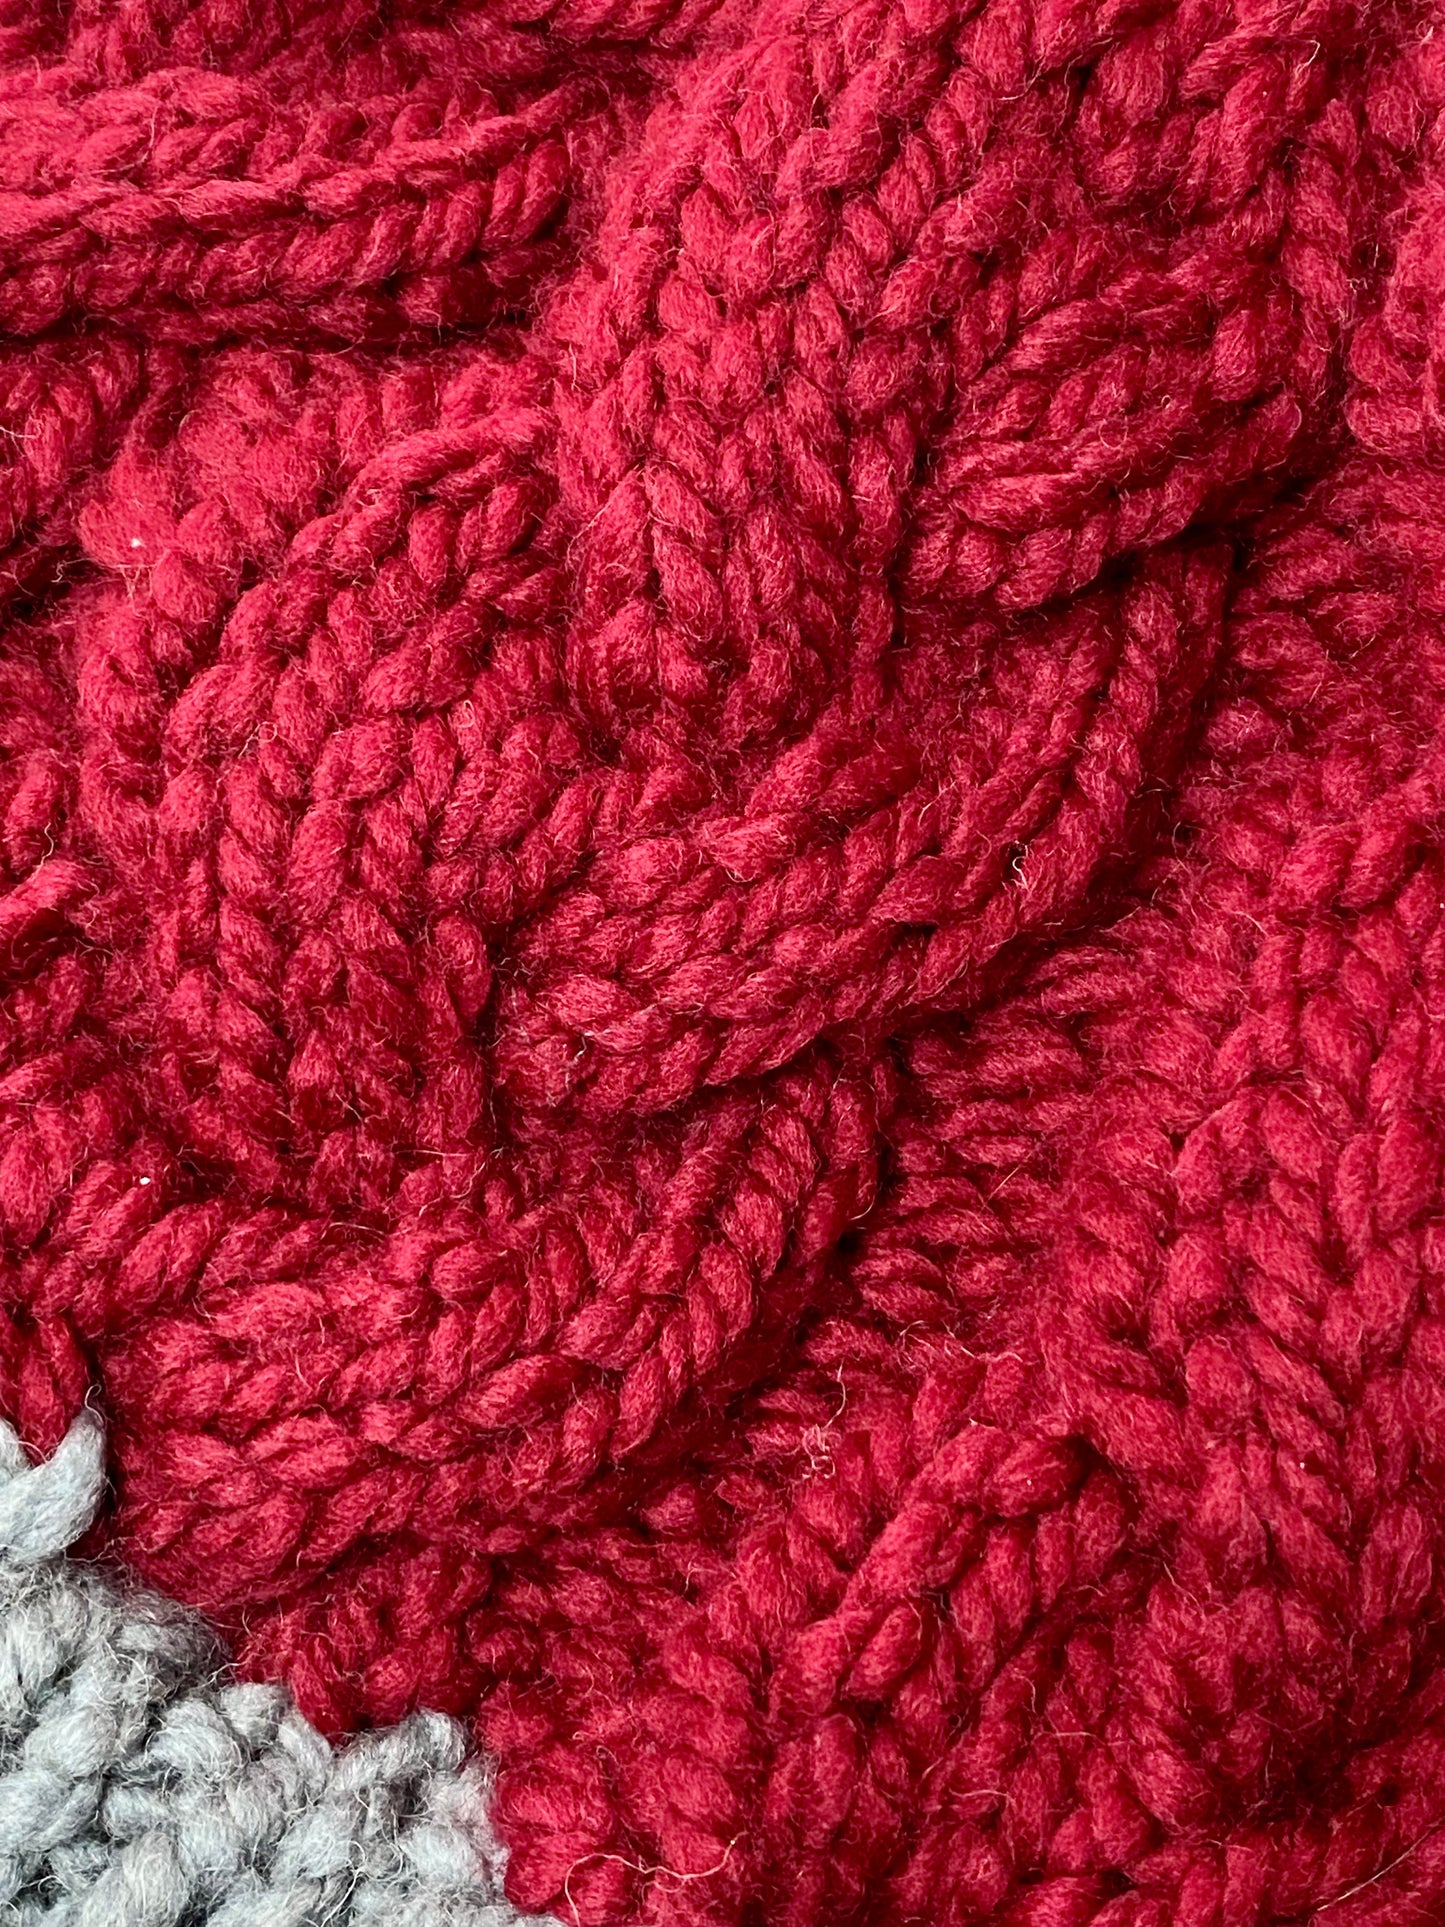 Cozy Cables Hat in Cranberry and Pewter- Wool Blend Fiber - Dual Tone